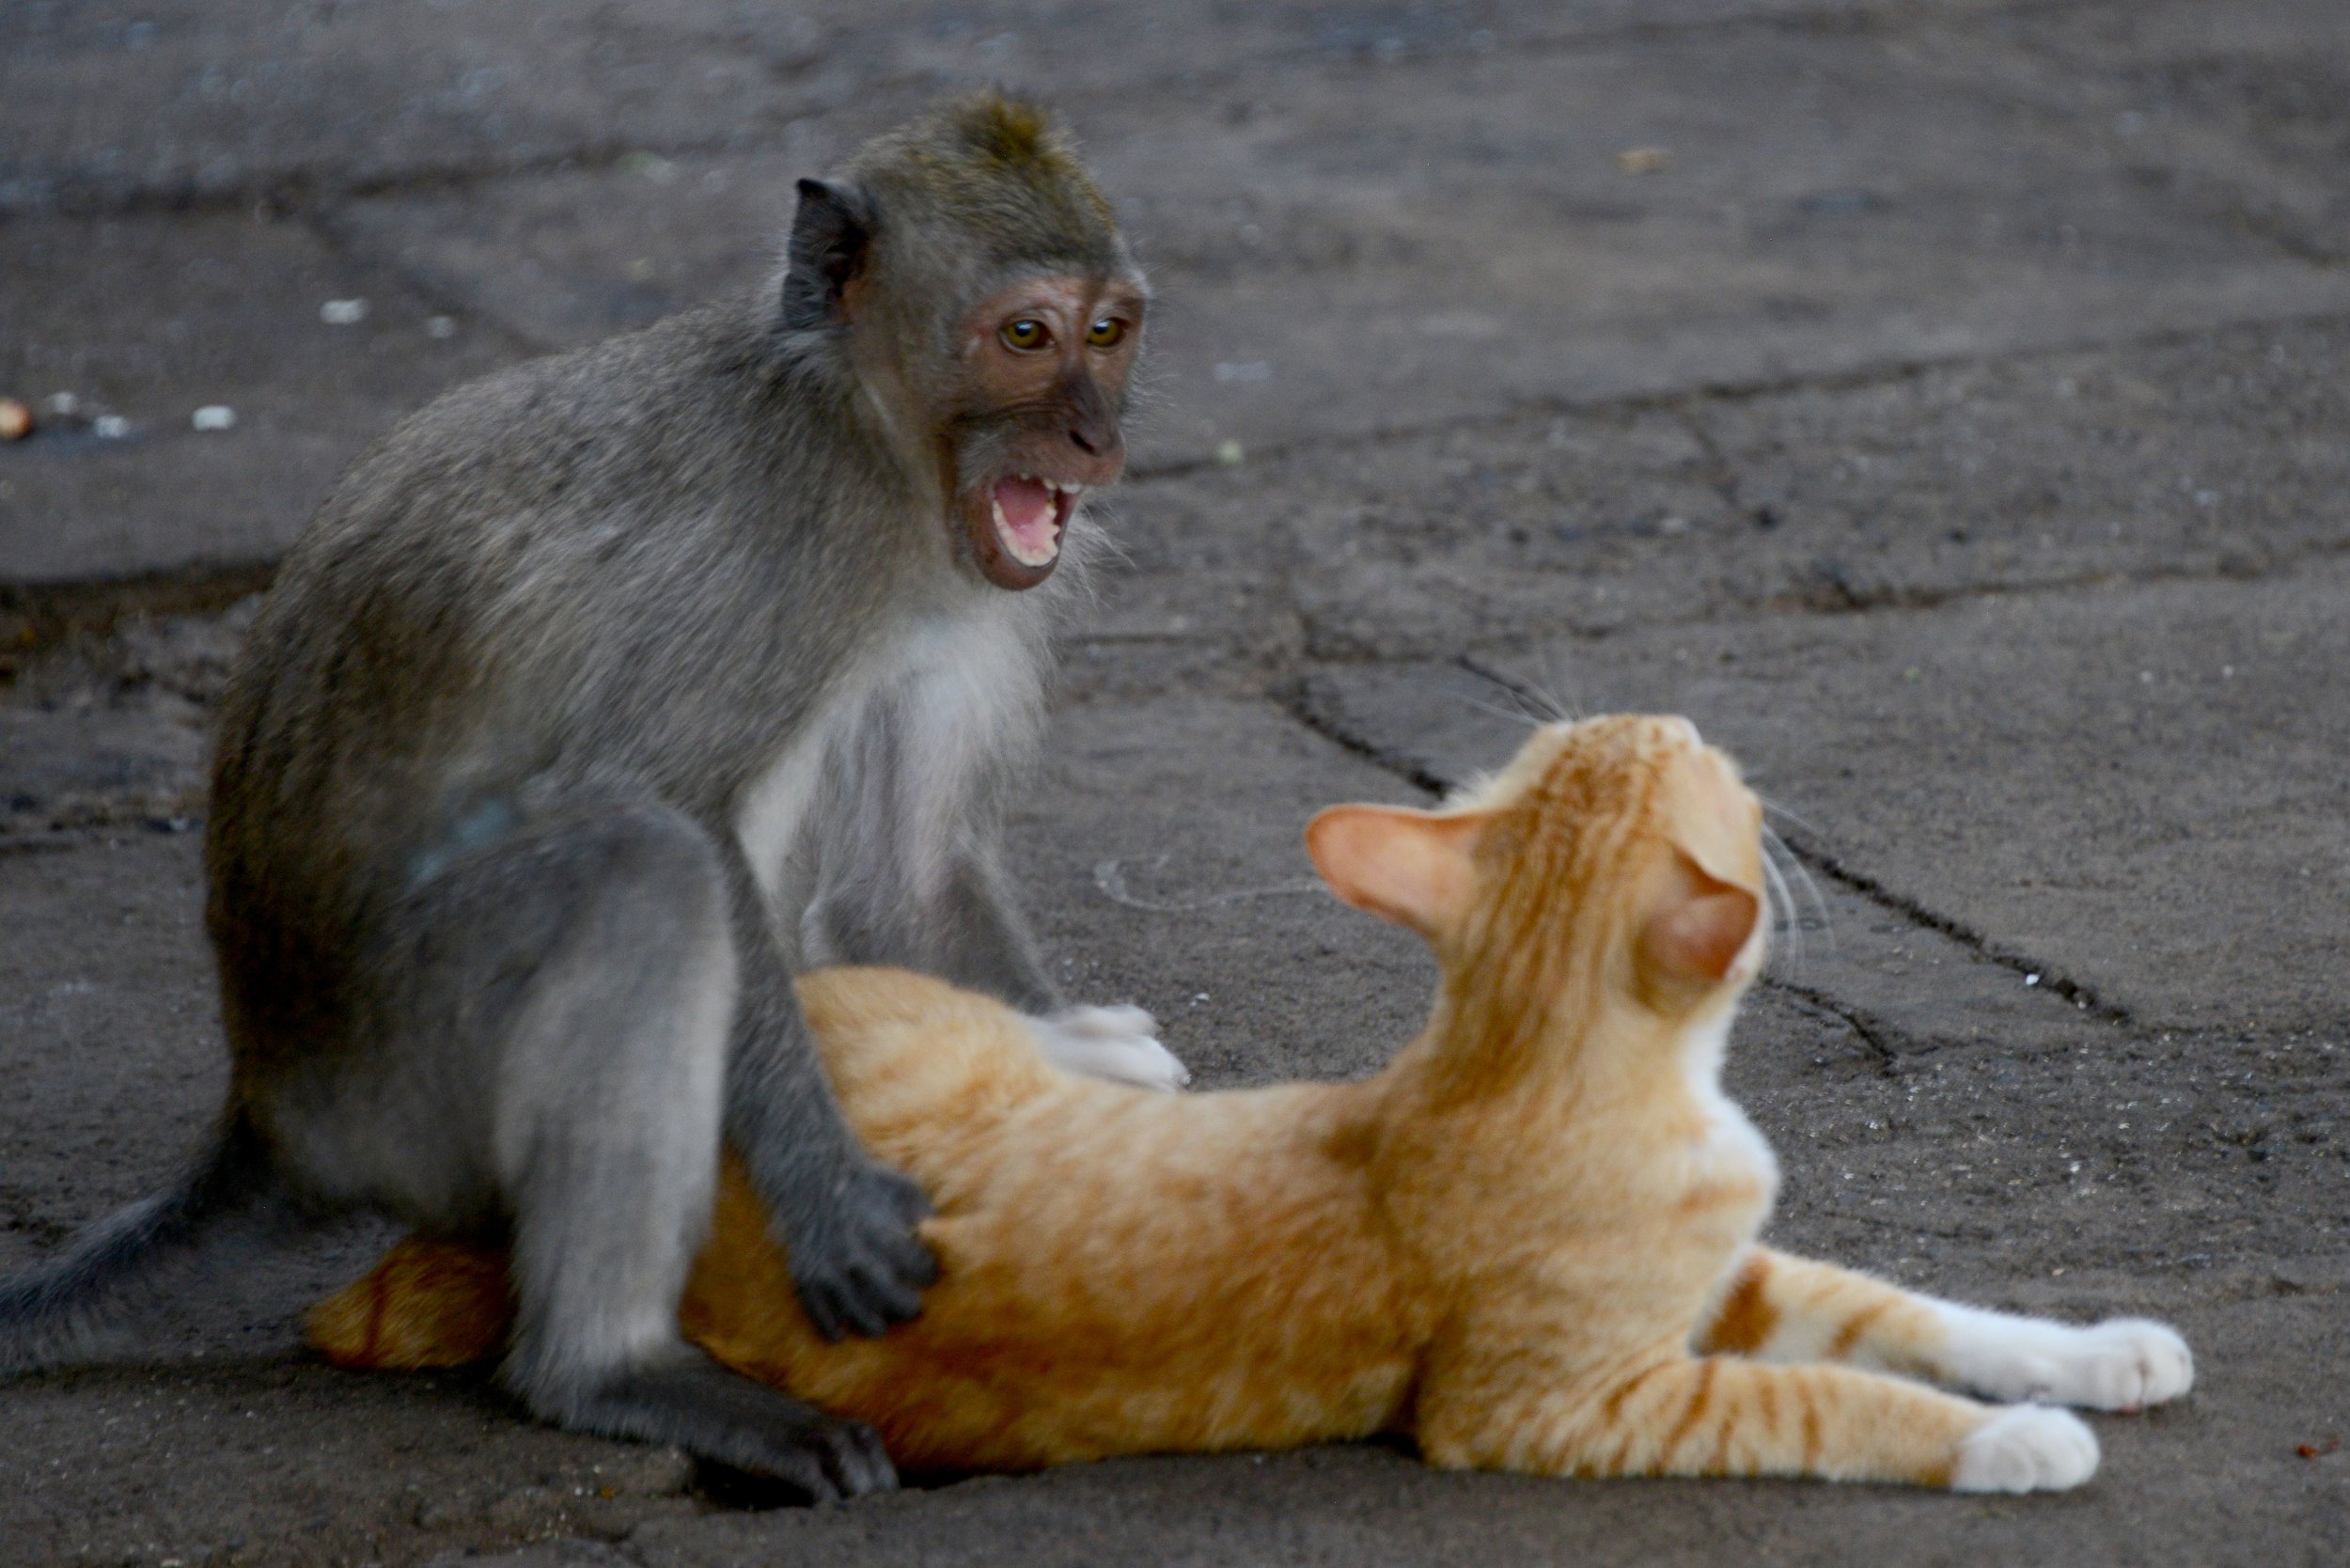 Indonesia's mischievious macaques